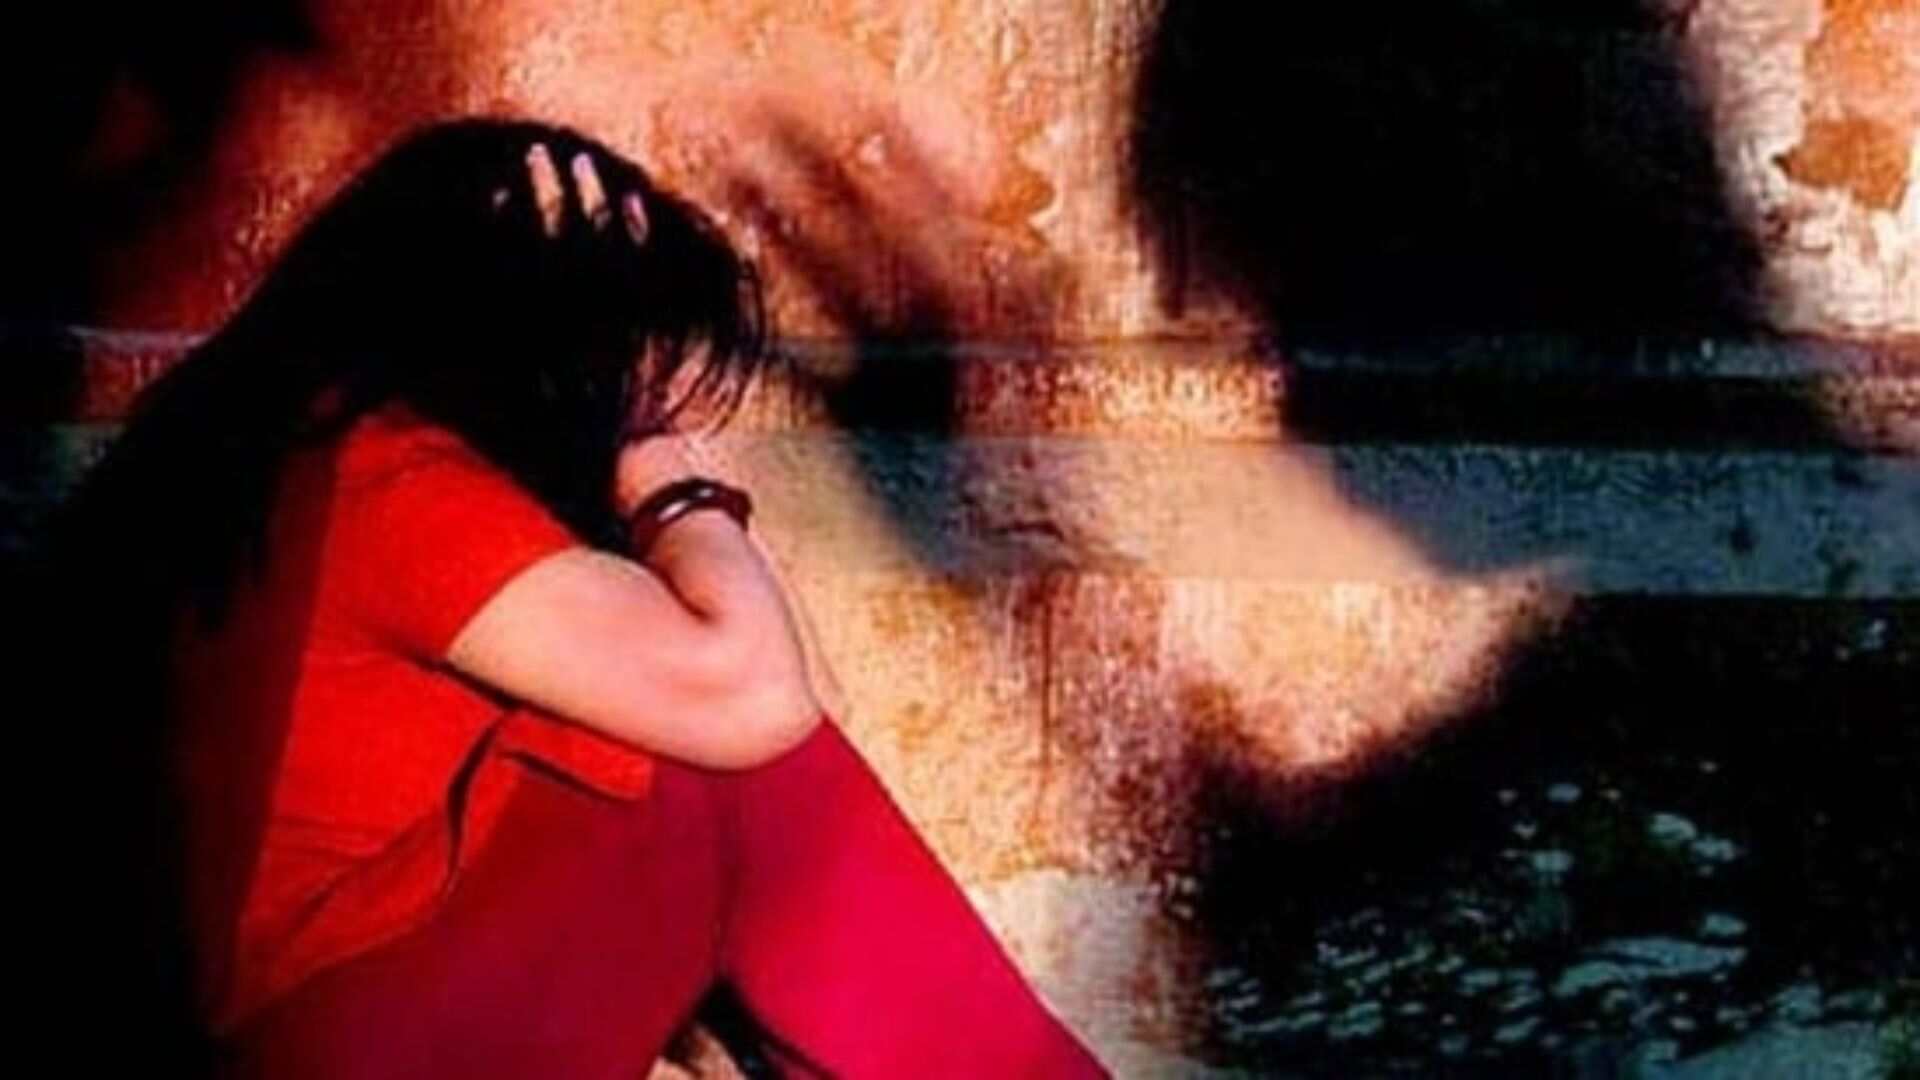 Two Sentenced To Death For Raping And Burning Alive 14-Year-Old Girl